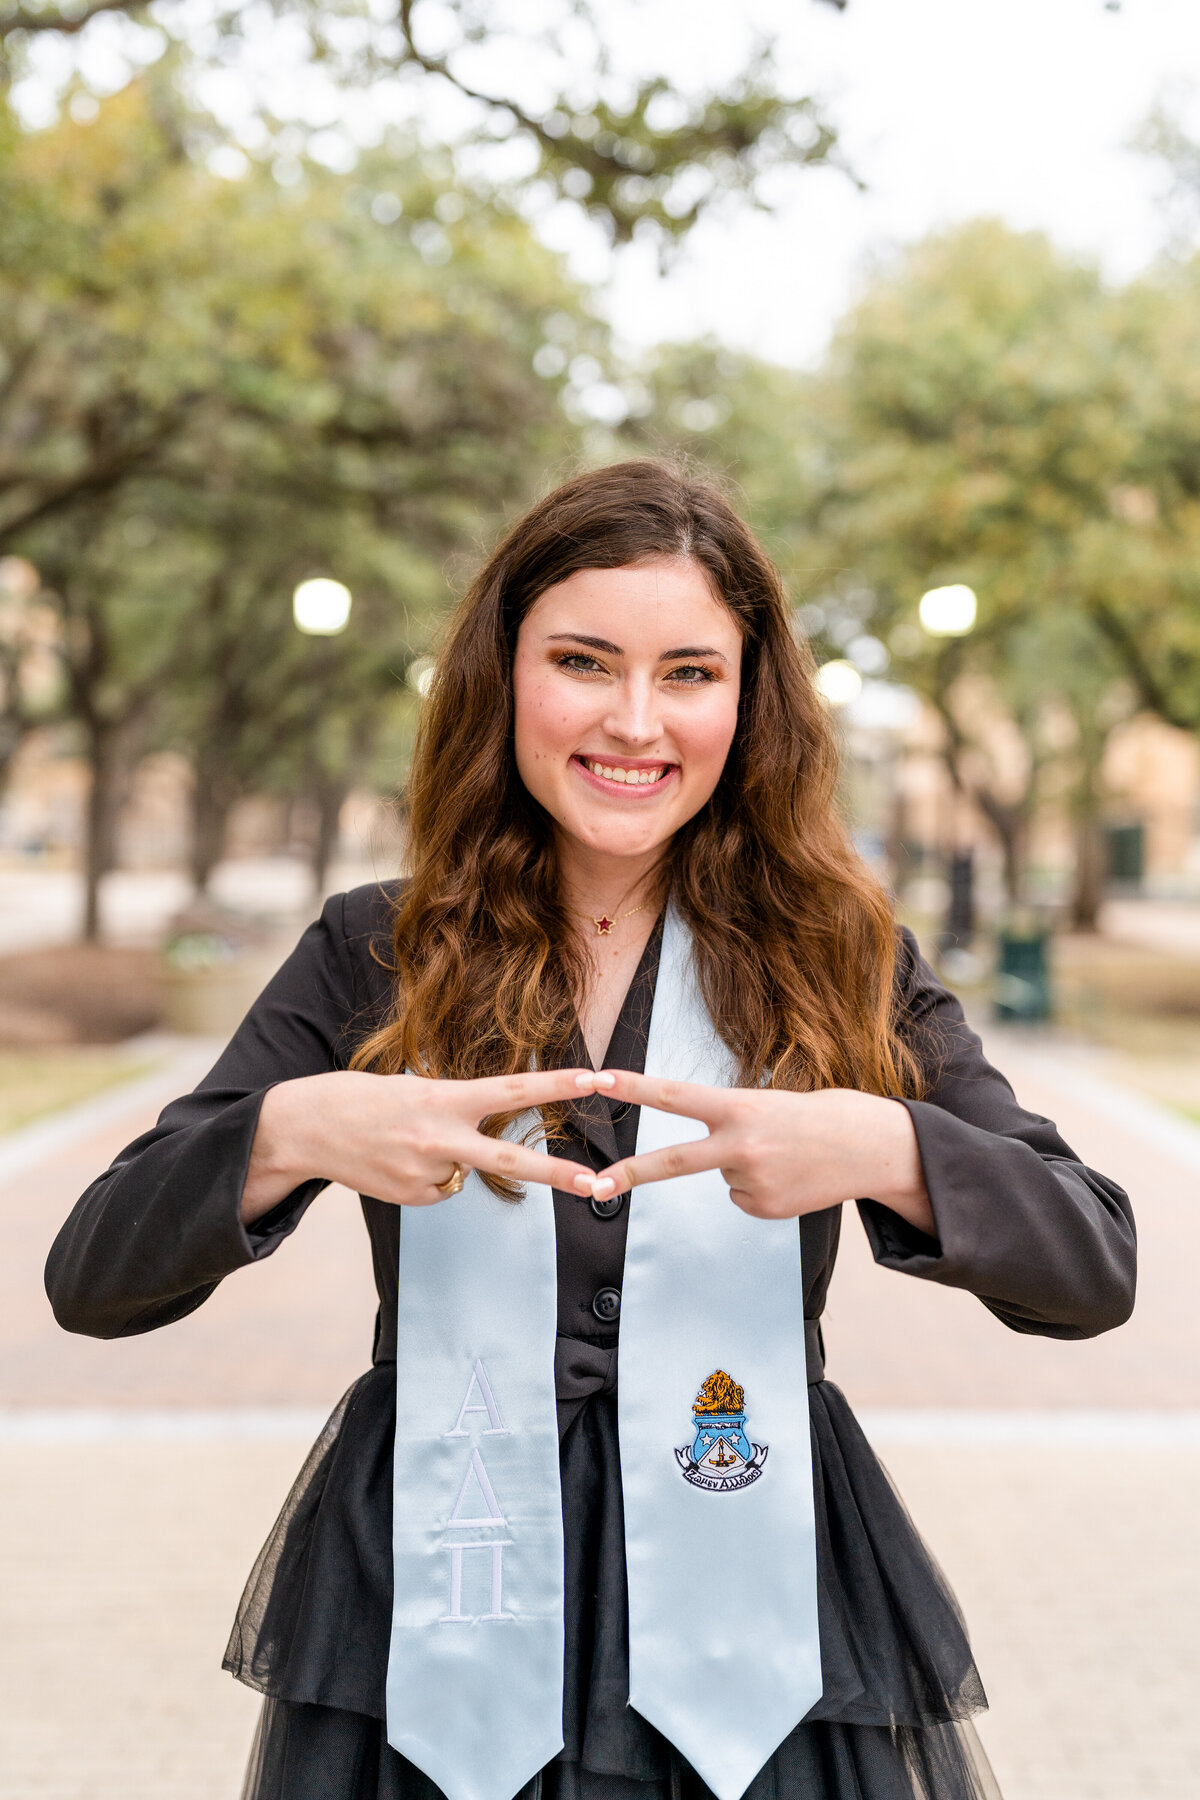 Texas A&M senior girl smiling and showing Pi Phi sign while wearing sorority stole and black dress in Military Plaza